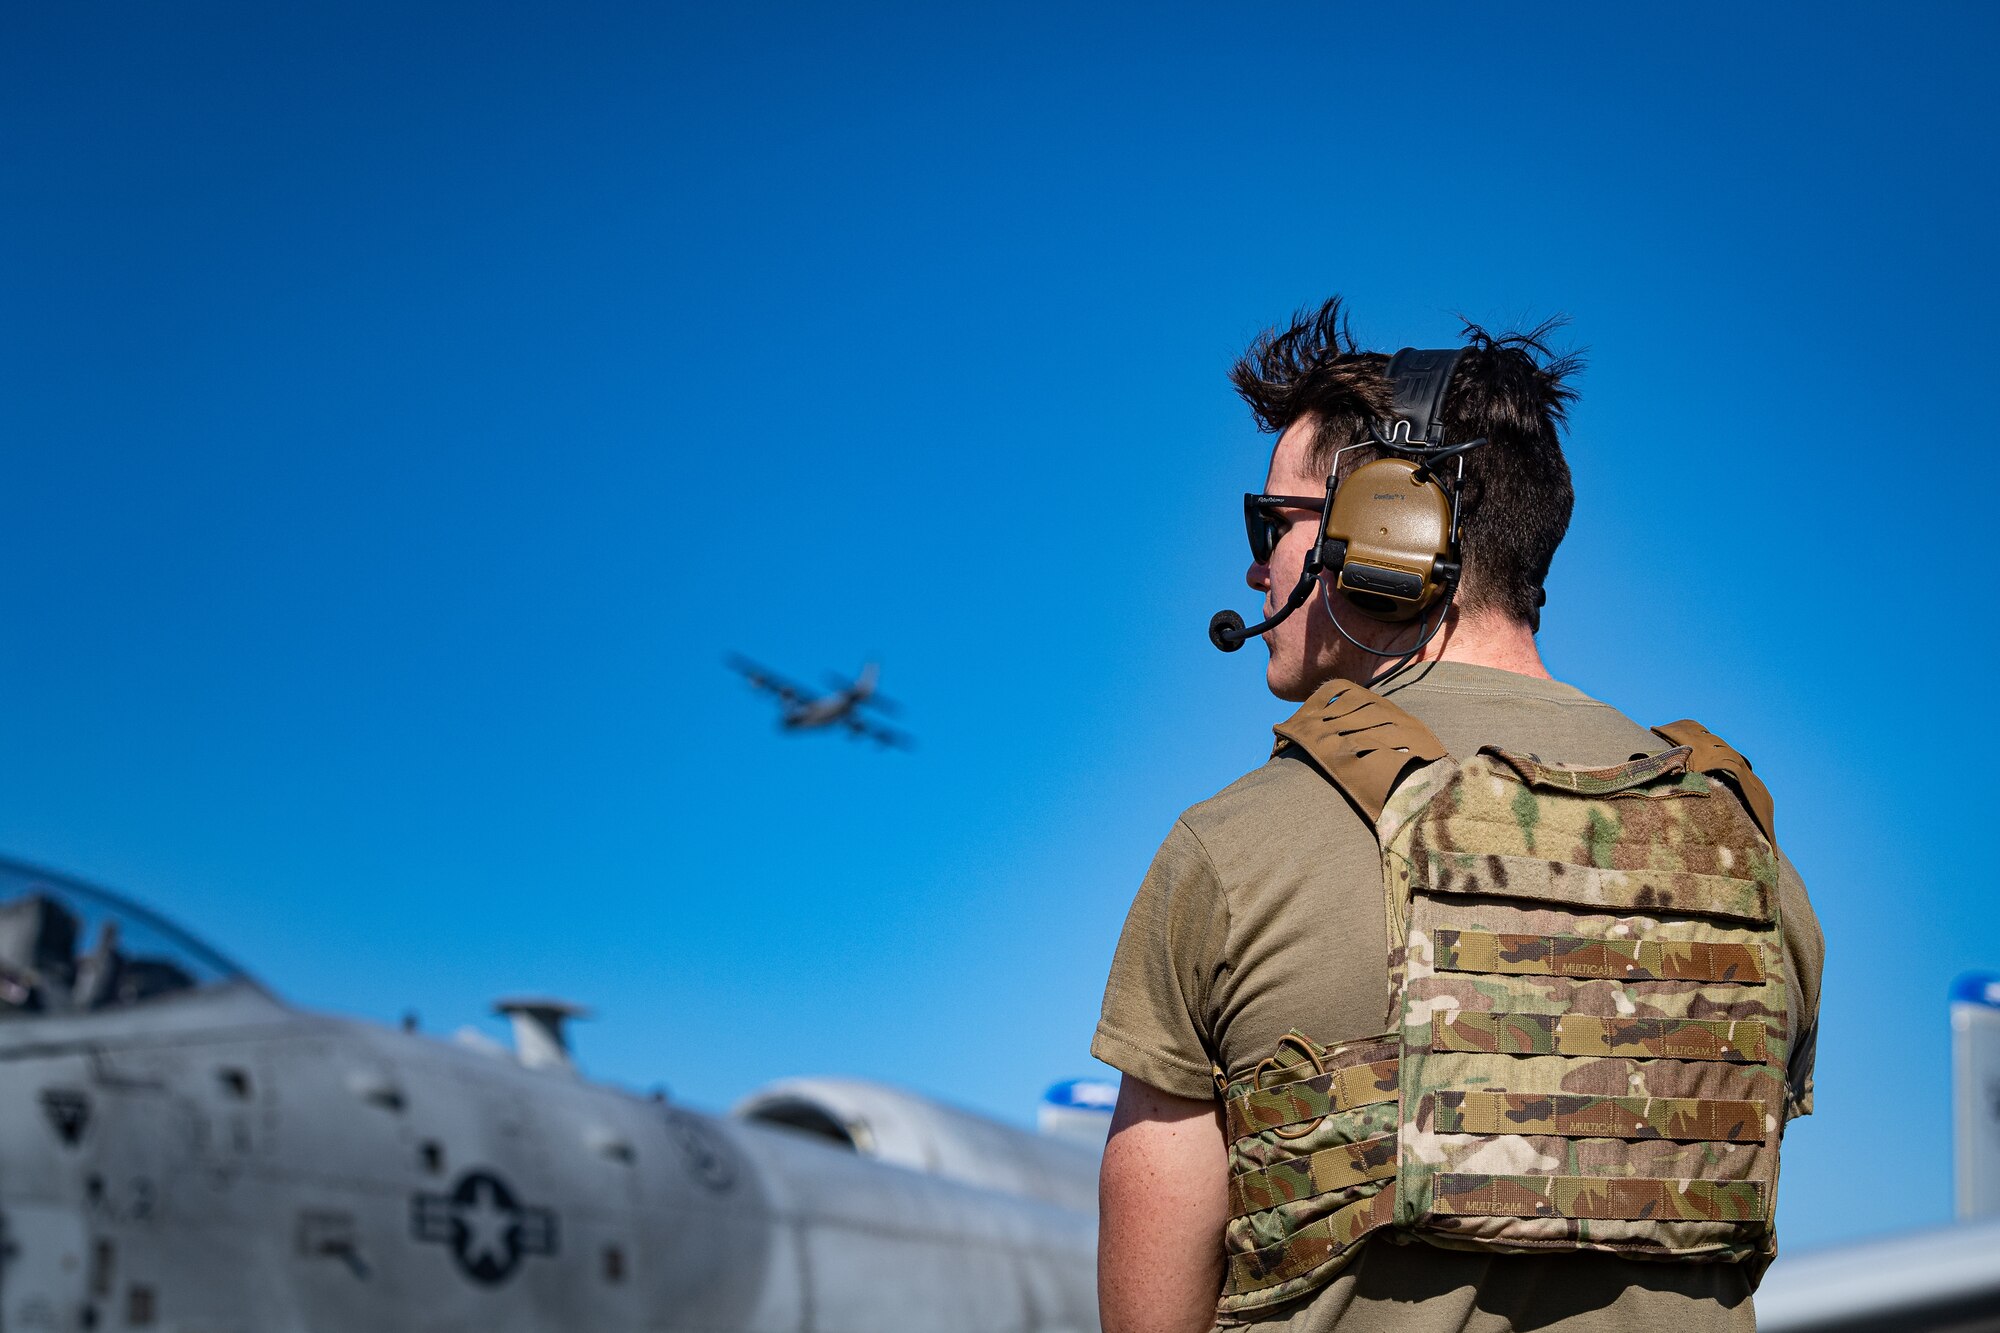 An Airman stands in front of an aircraft while another aircraft flies overhead